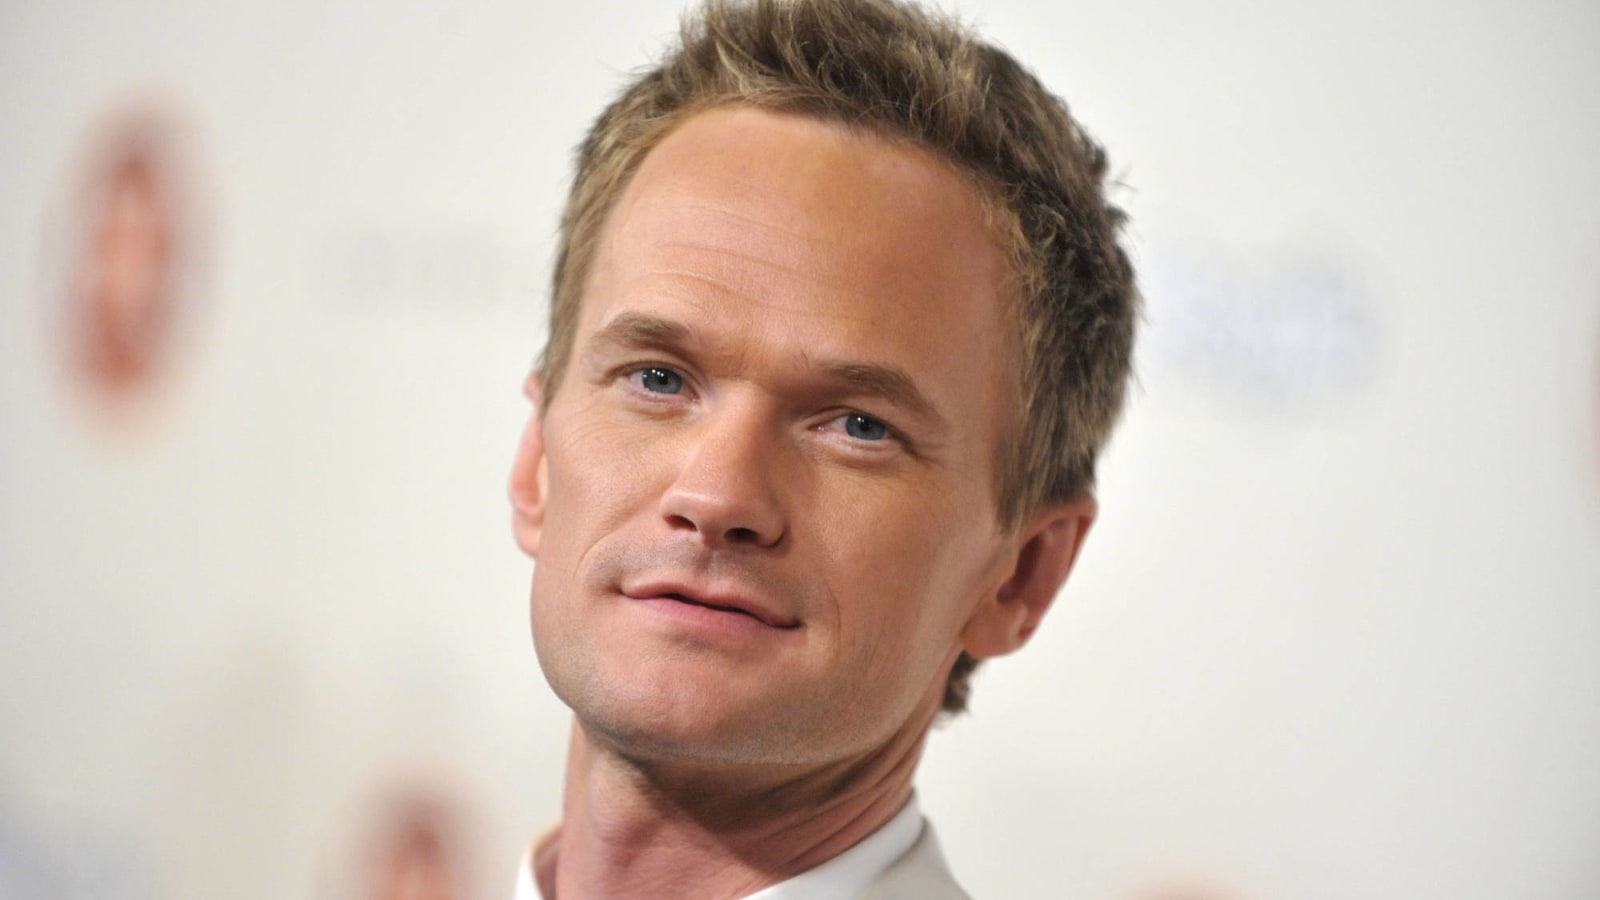 Legendary: Everything Neil Patrick Harris has accomplished by 45